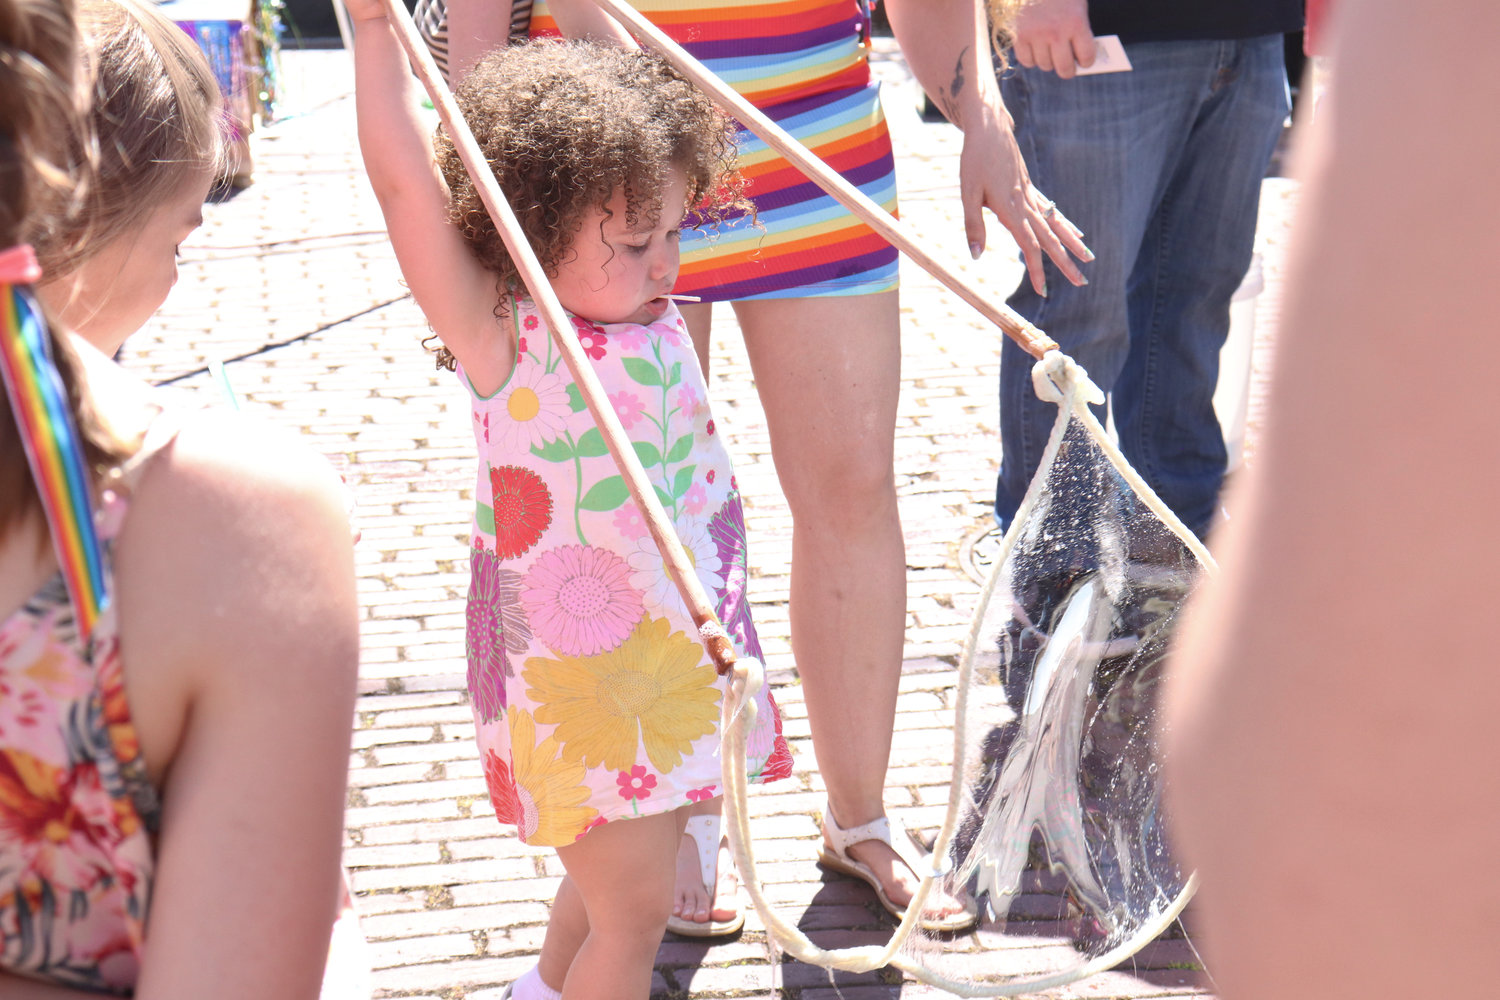 Layla, 1, creates a giant bubble during Lewis County Pride in Centralia on Saturday.